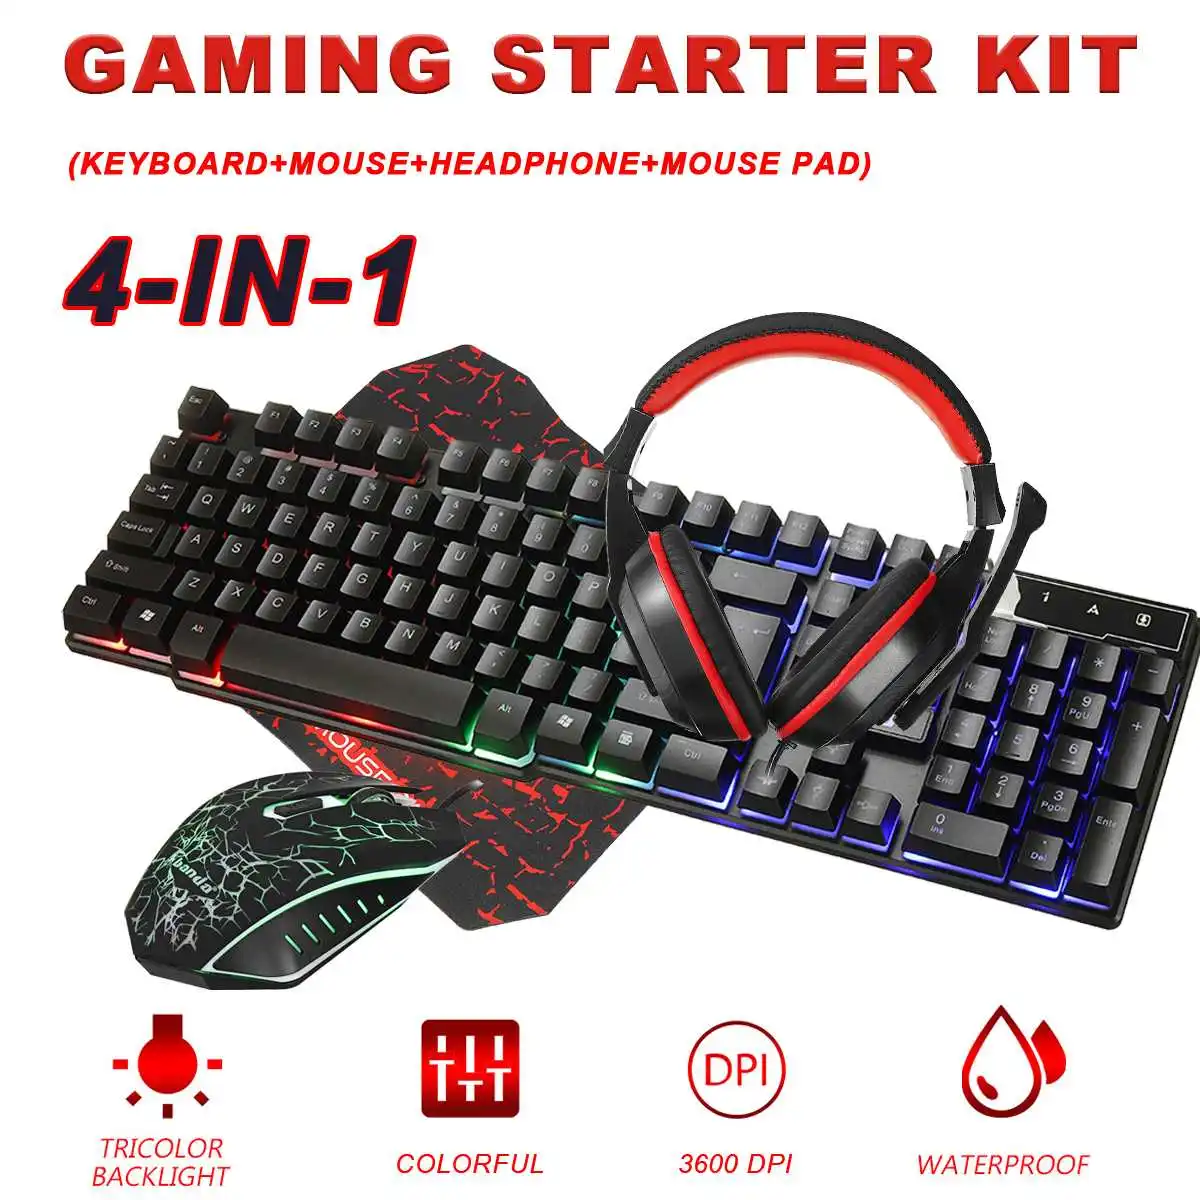 

4in1 Gaming keyboard and Mouse Wired keyboard backlight keyboard Russian Spanish Gamer kit Silent Gaming Mouse Set for PC Laptop